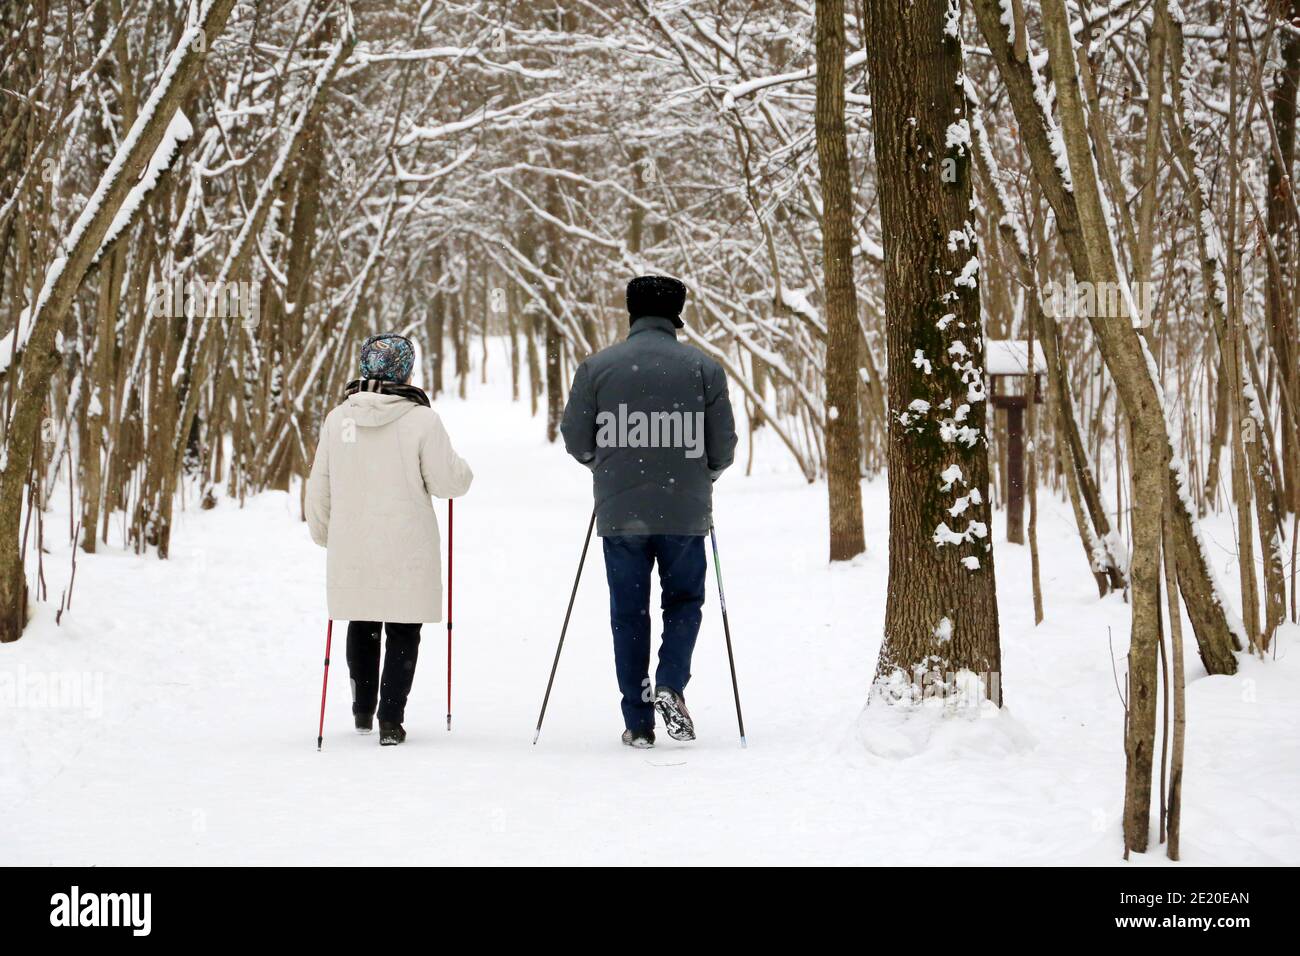 Nordic walking, healthy lifestyle. Elderly couple with sticks in winter park during snowfall, cold weather Stock Photo